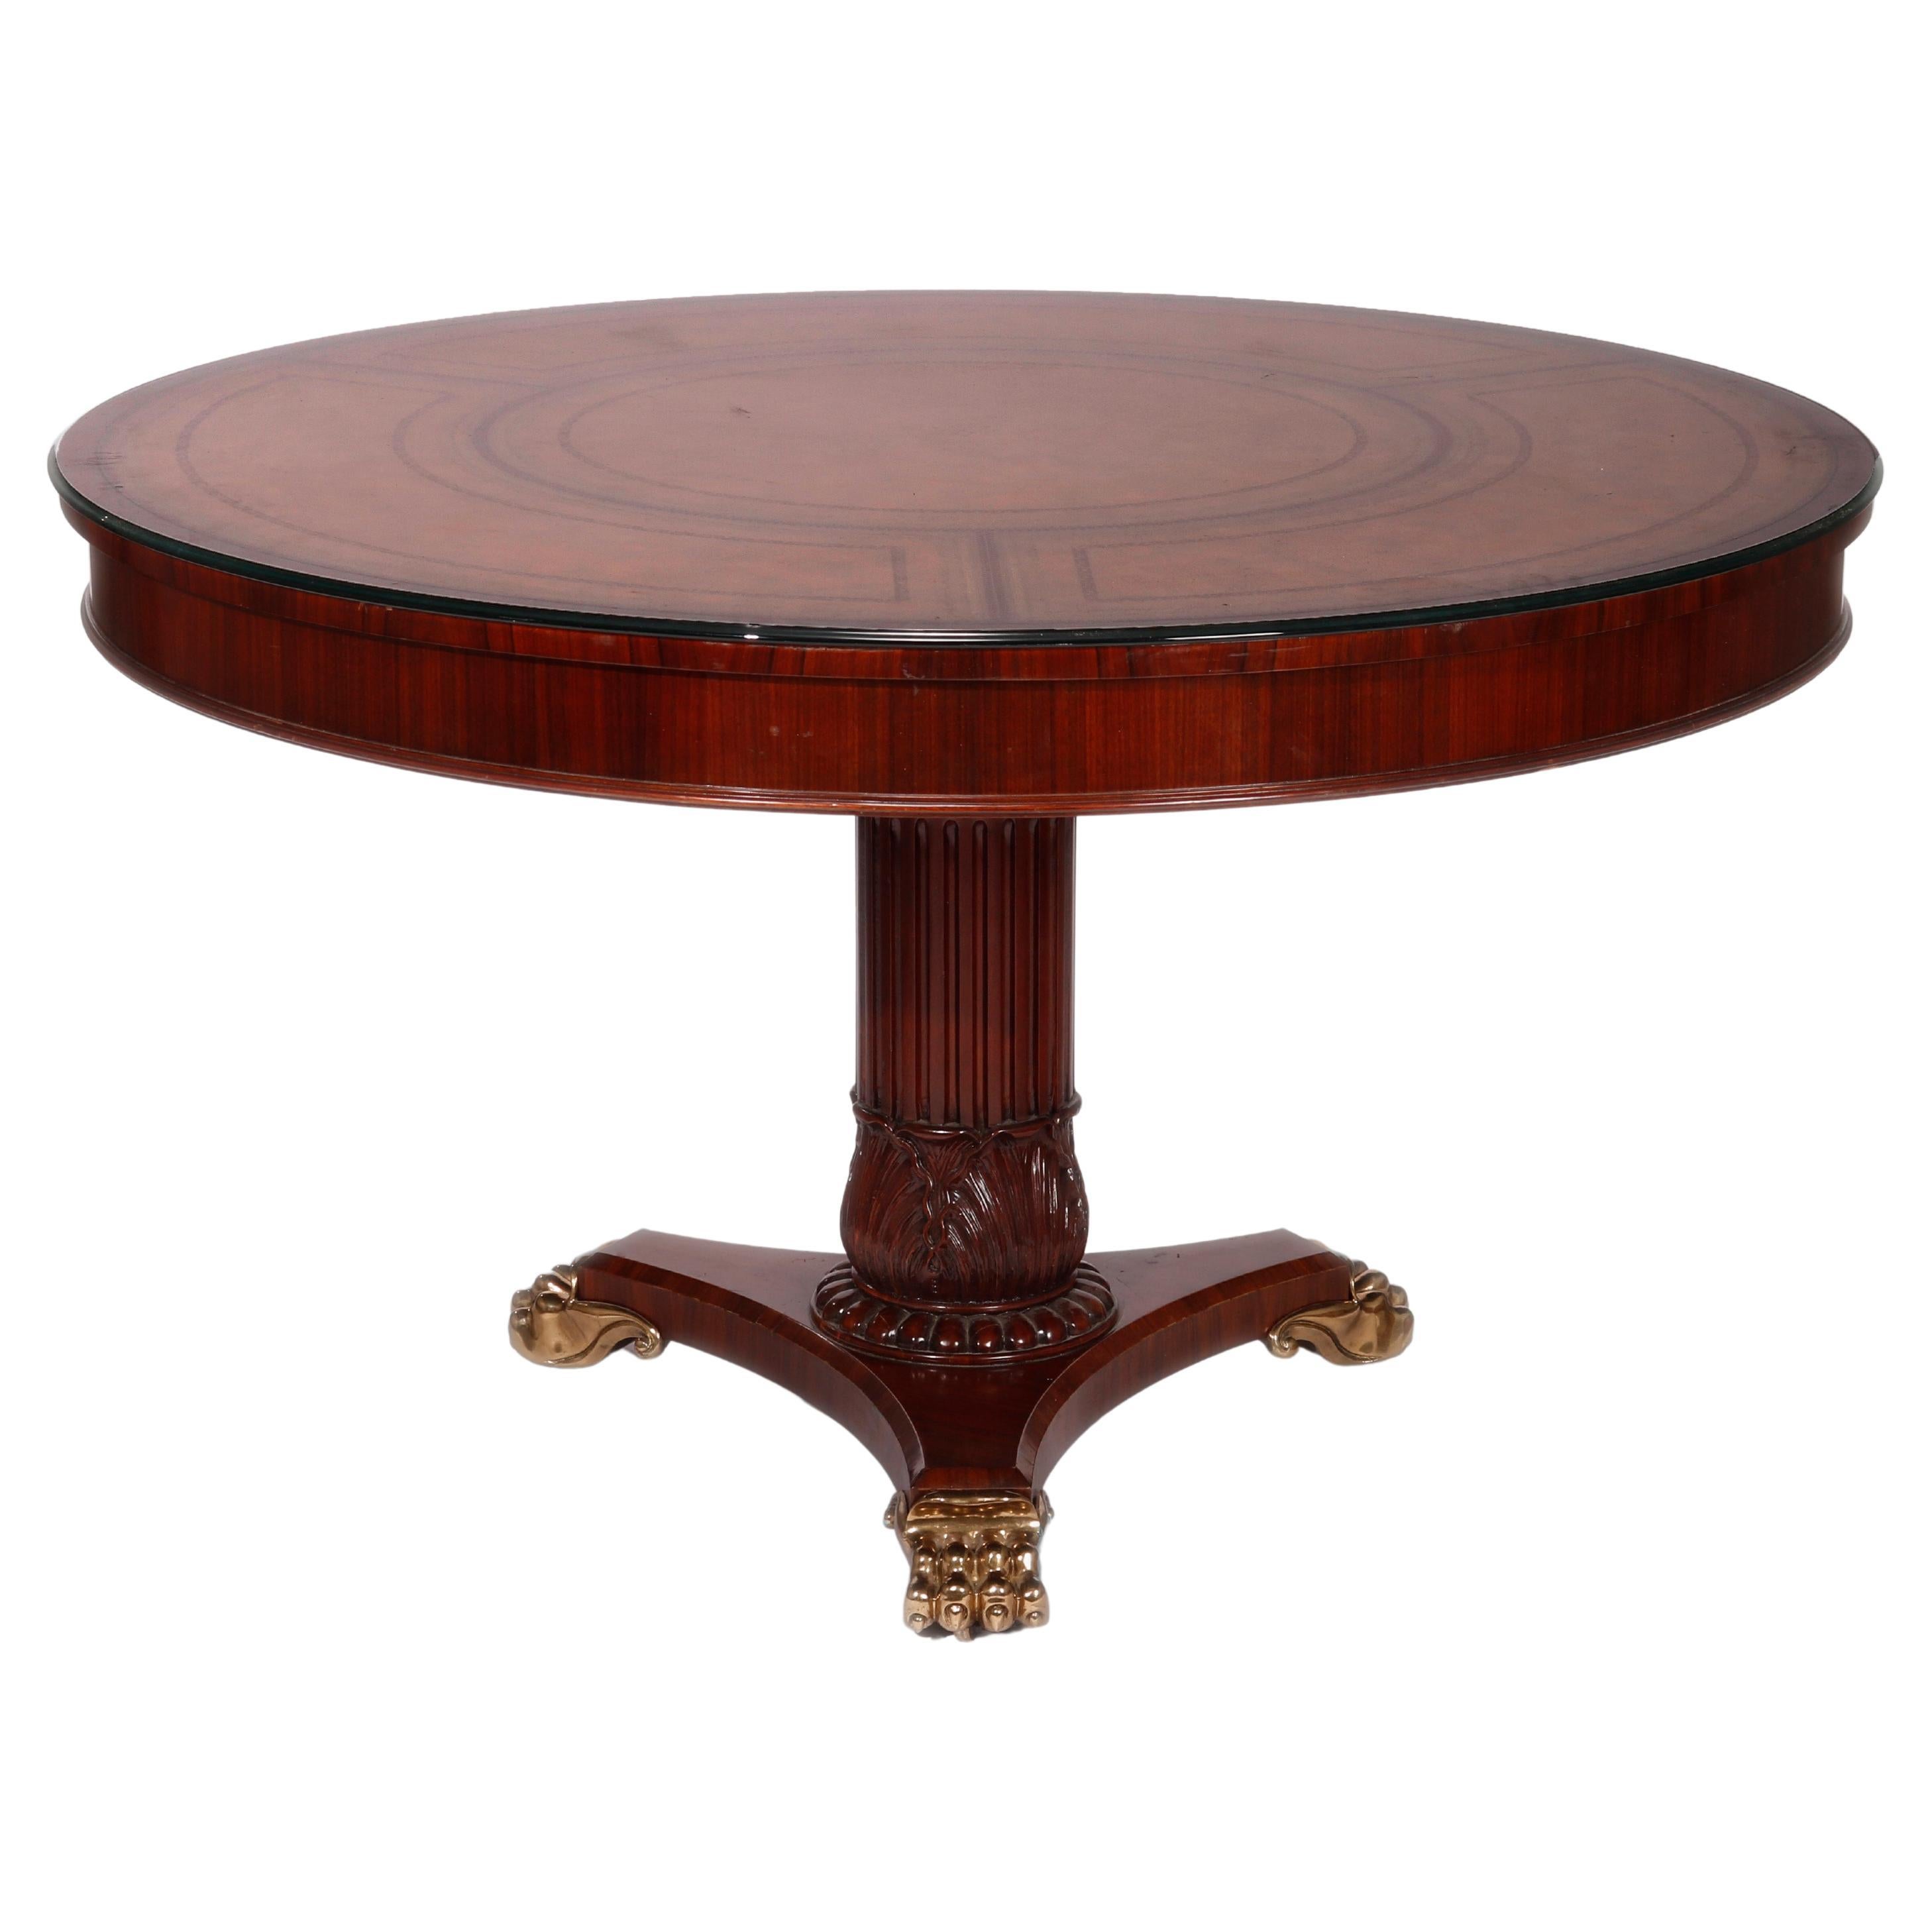 Maitland Smith Neoclassical Rosewood, Mahogany, Leather & Brass Center Table